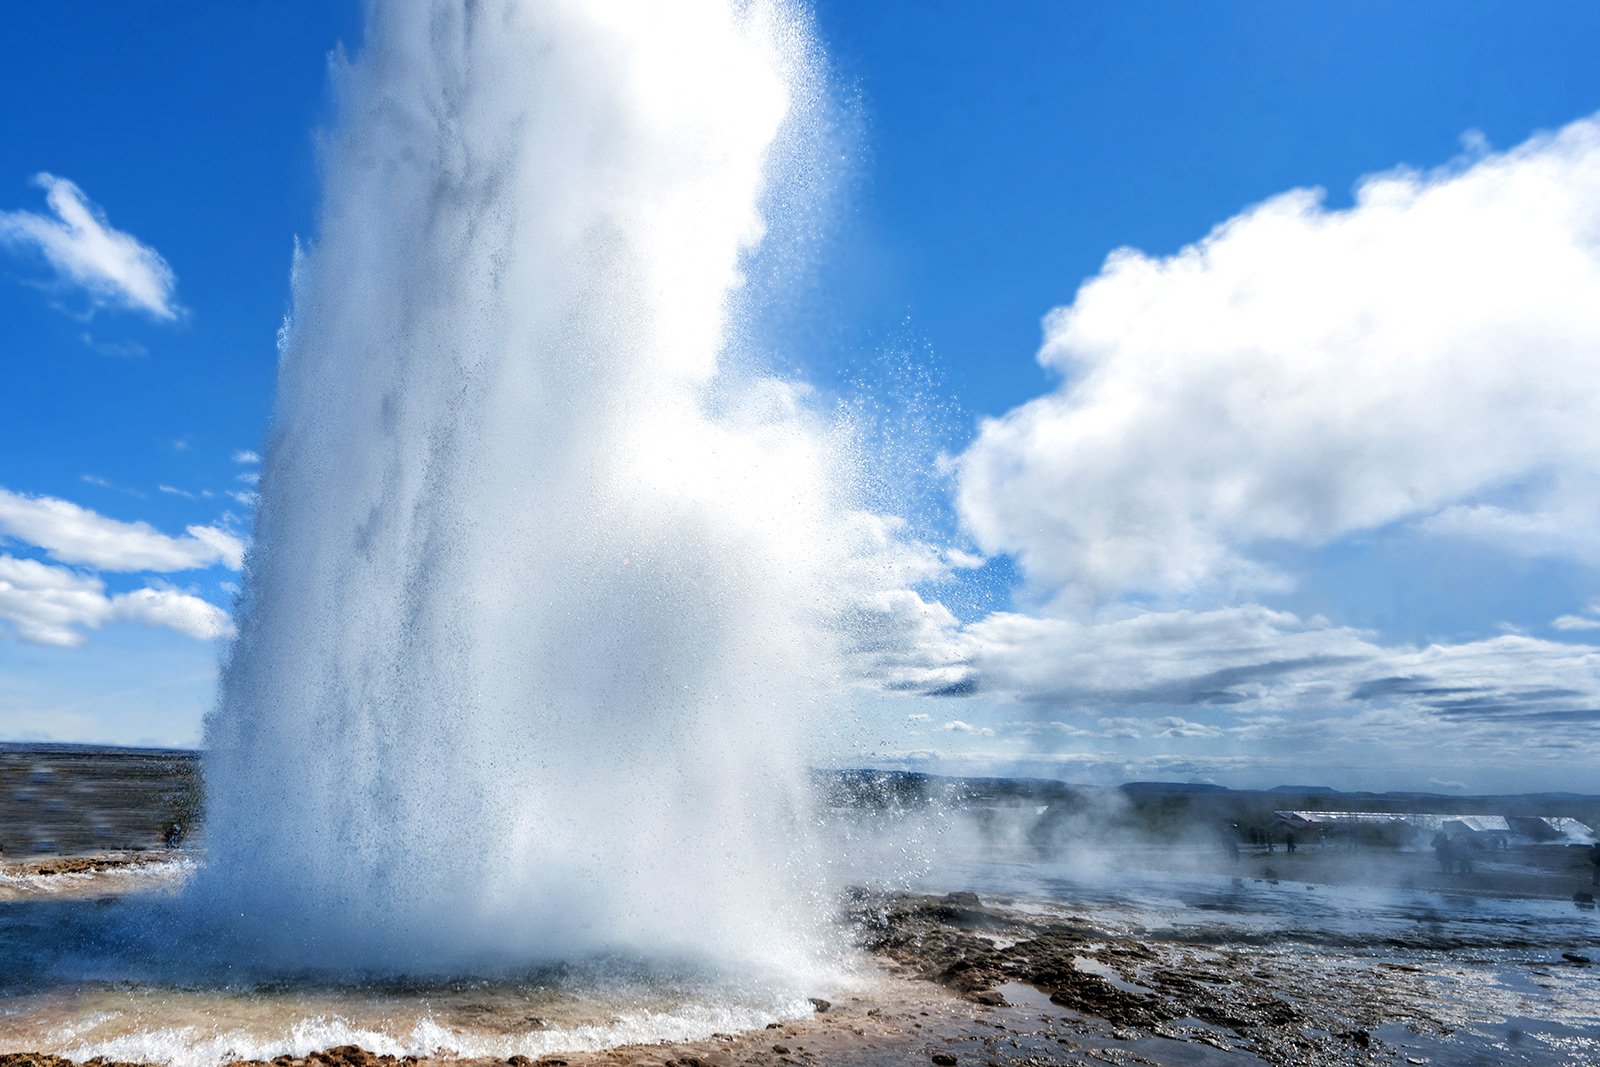 How to see a spouting geyser in Reykjavik